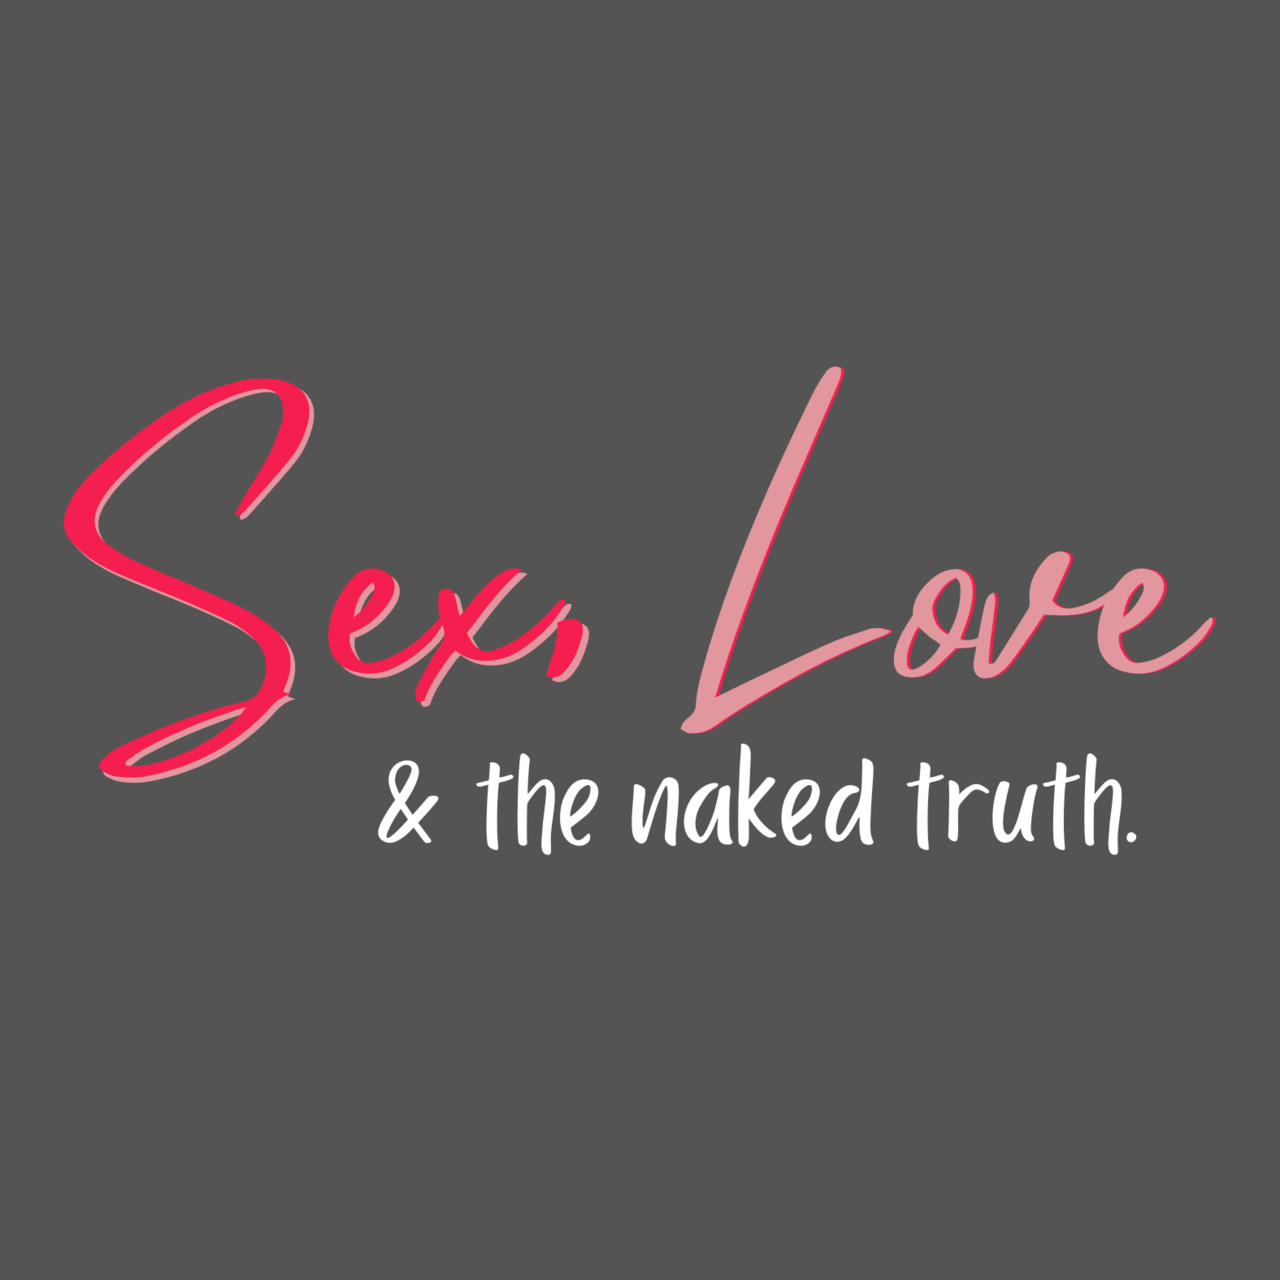 Sex, Love, & the Naked Truth.